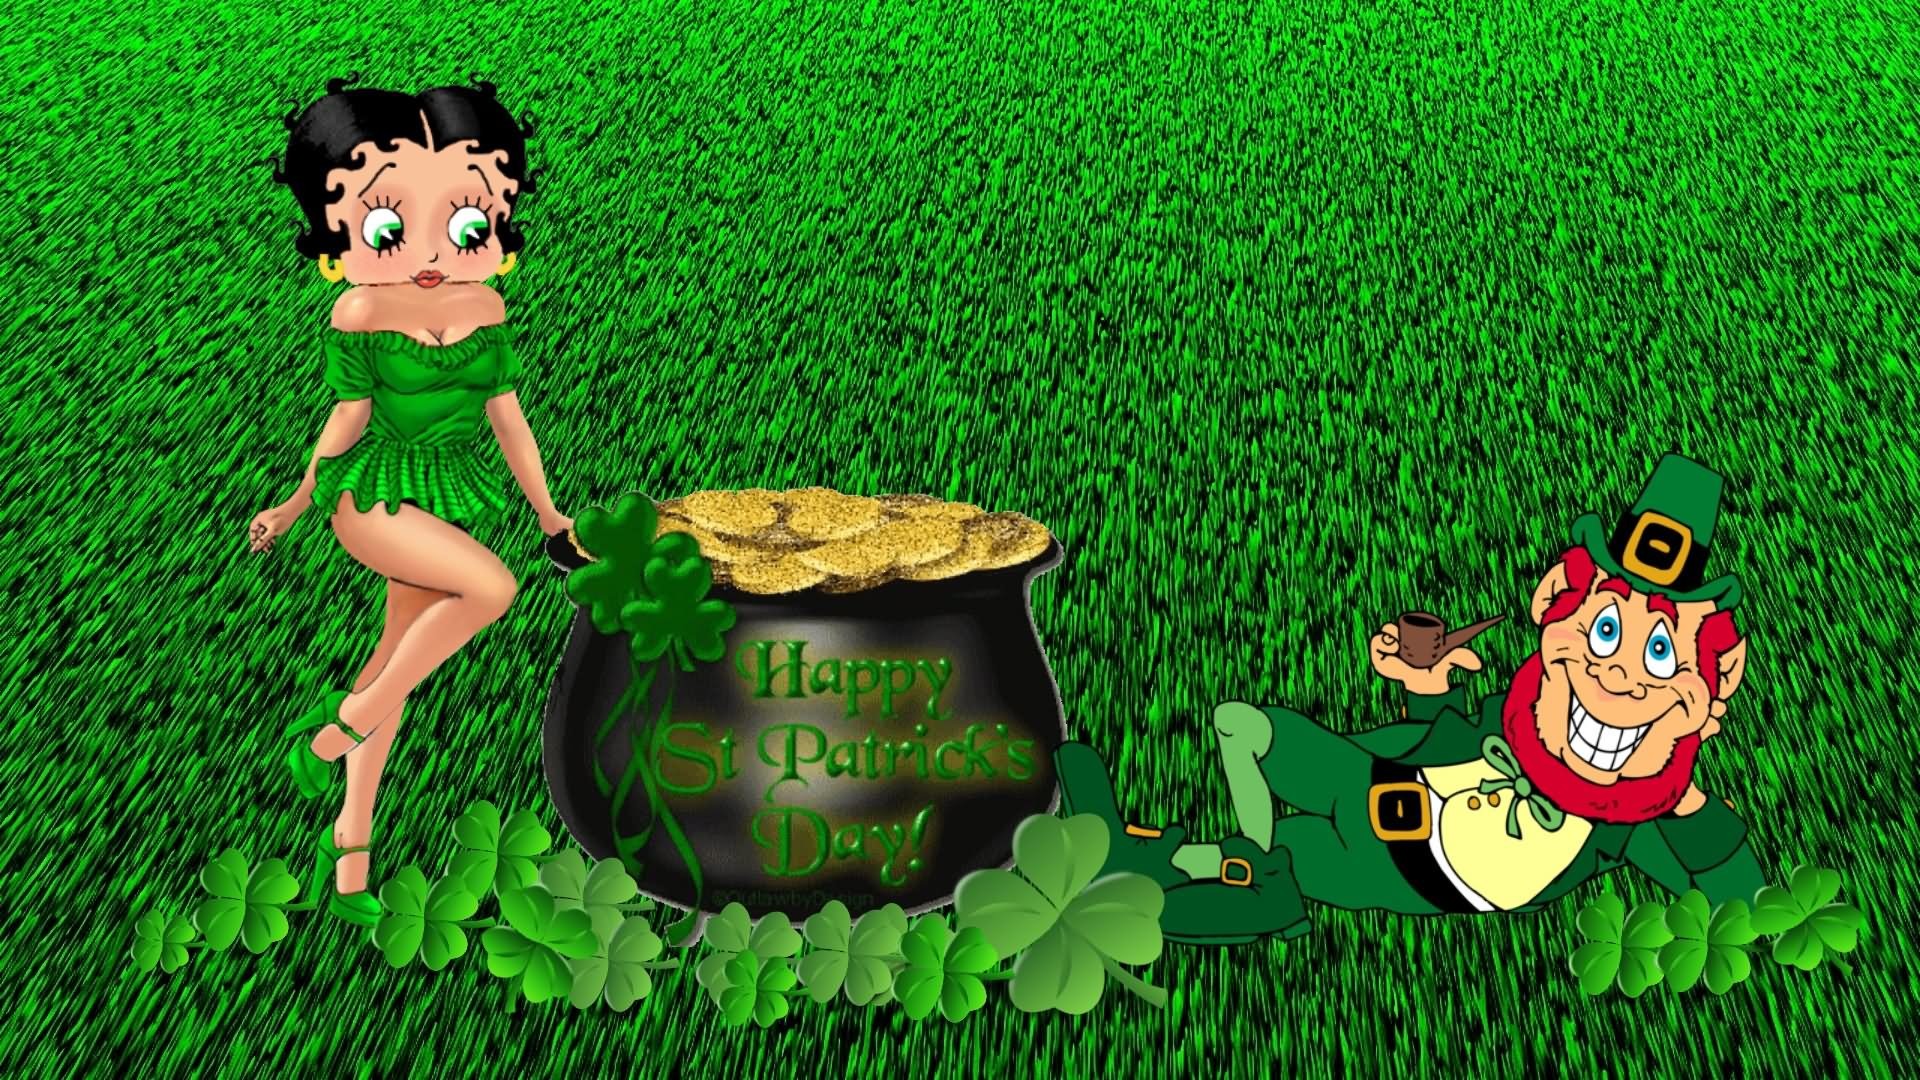 1920x1080 Betty Boop Wishes You Happy Saint Patrick's Day HD Wallpaper